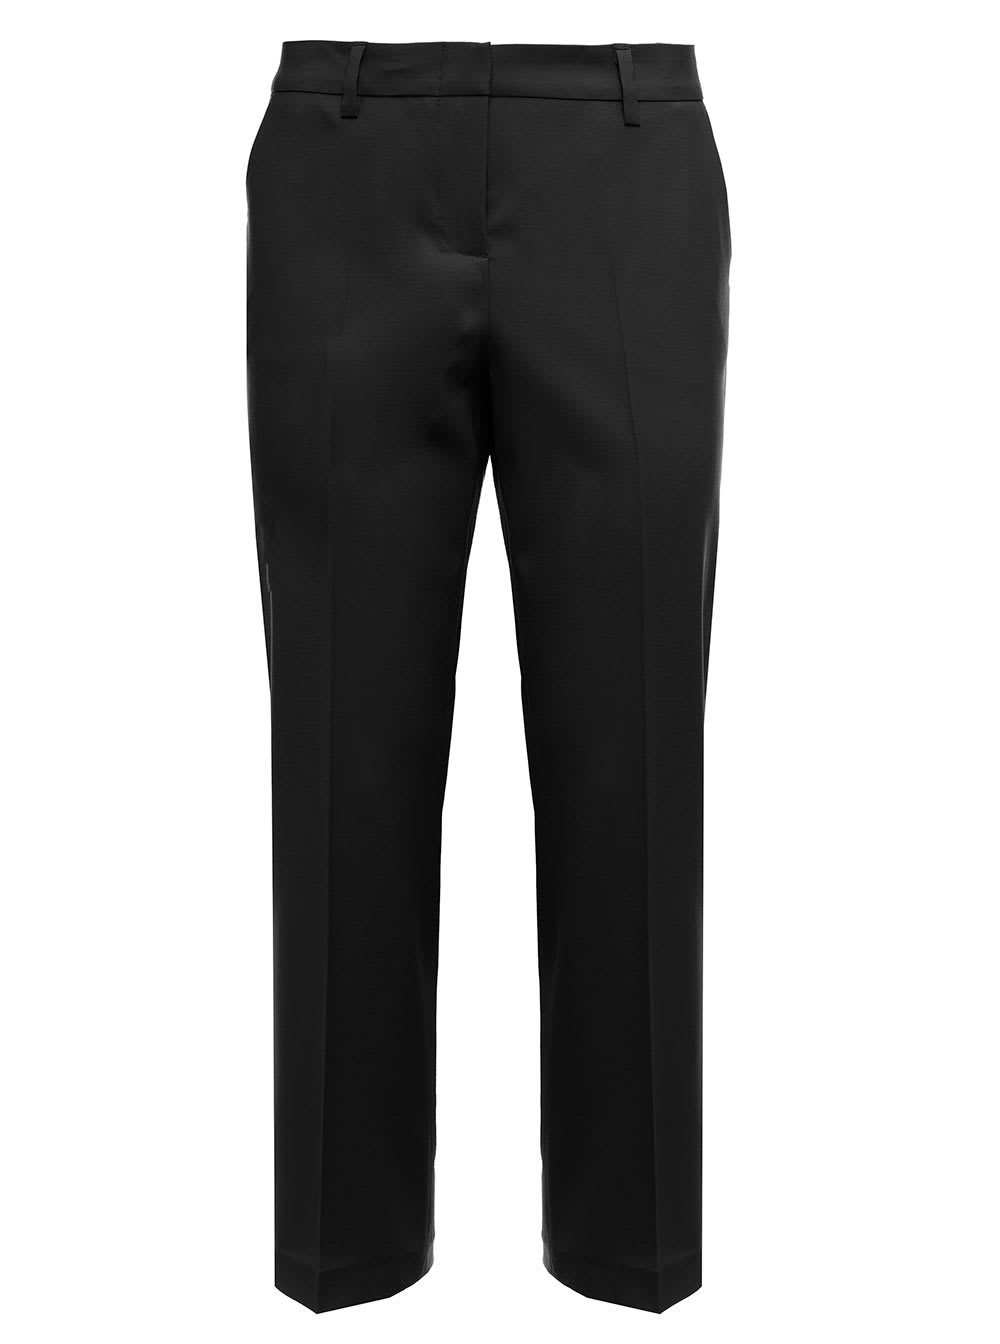 Tonello Womans Black Wool Tailored Pants